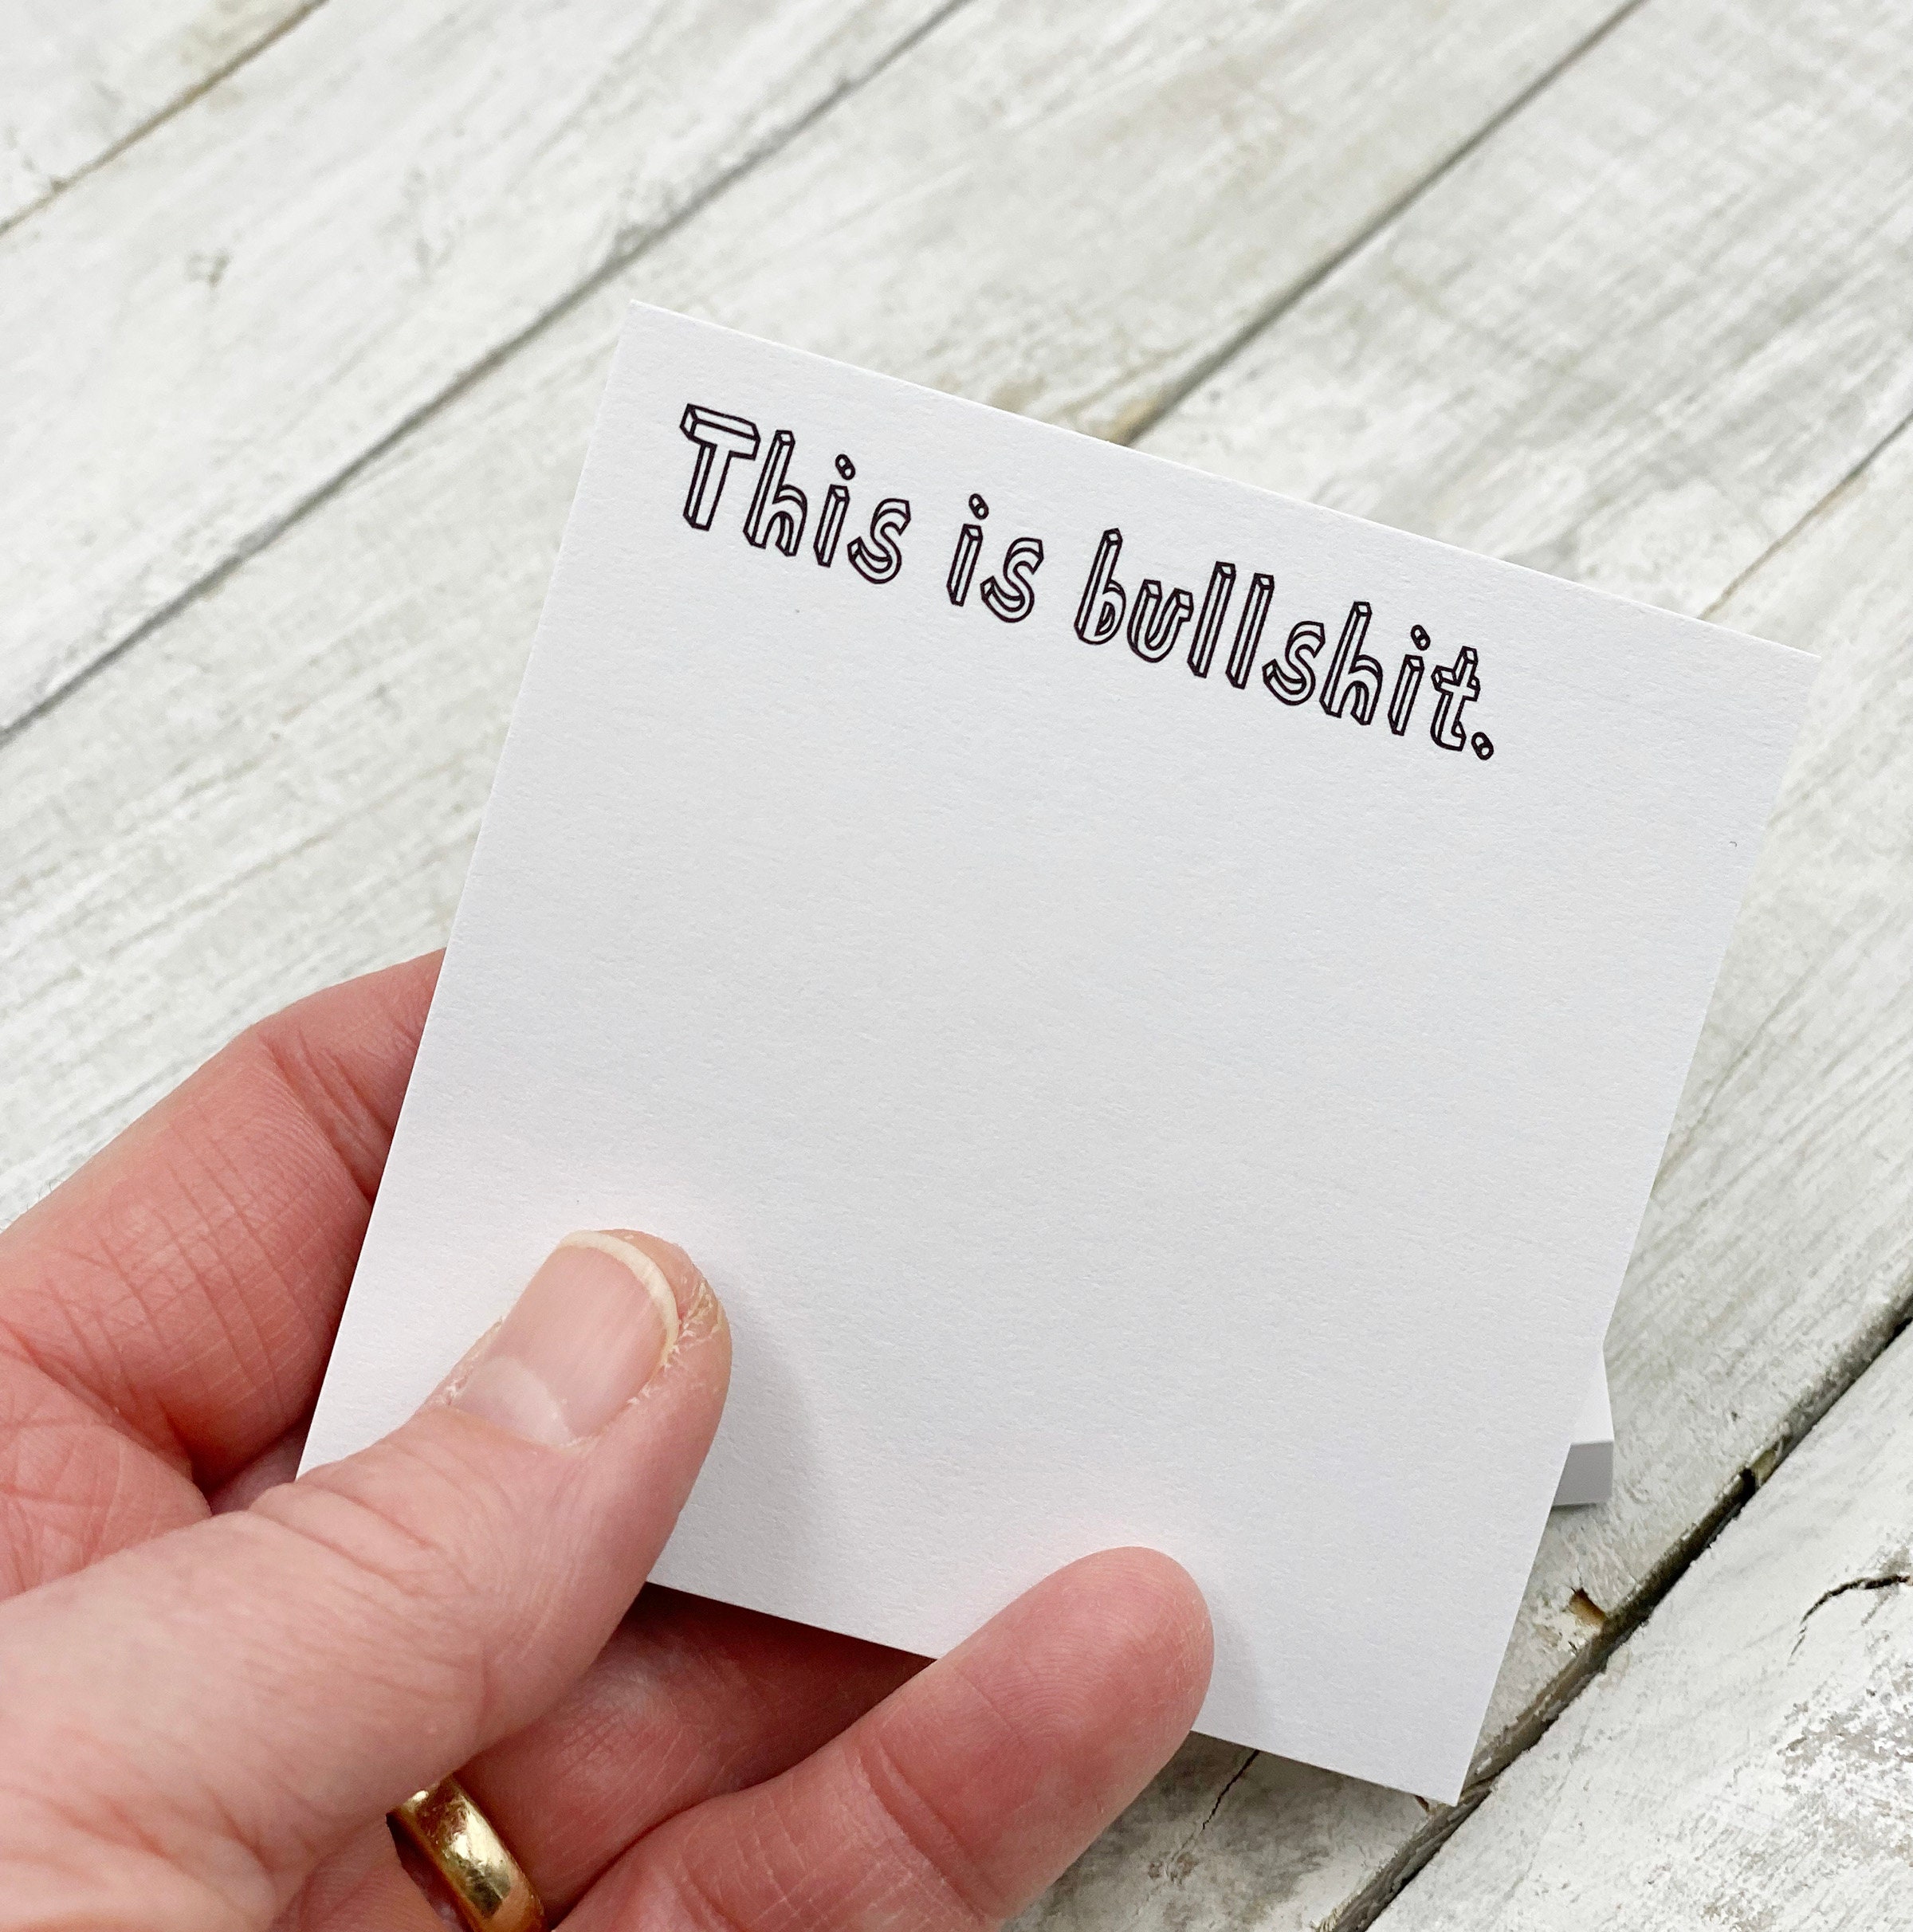 Adult Humor Stationery This is Bullshit Sticky Notes 